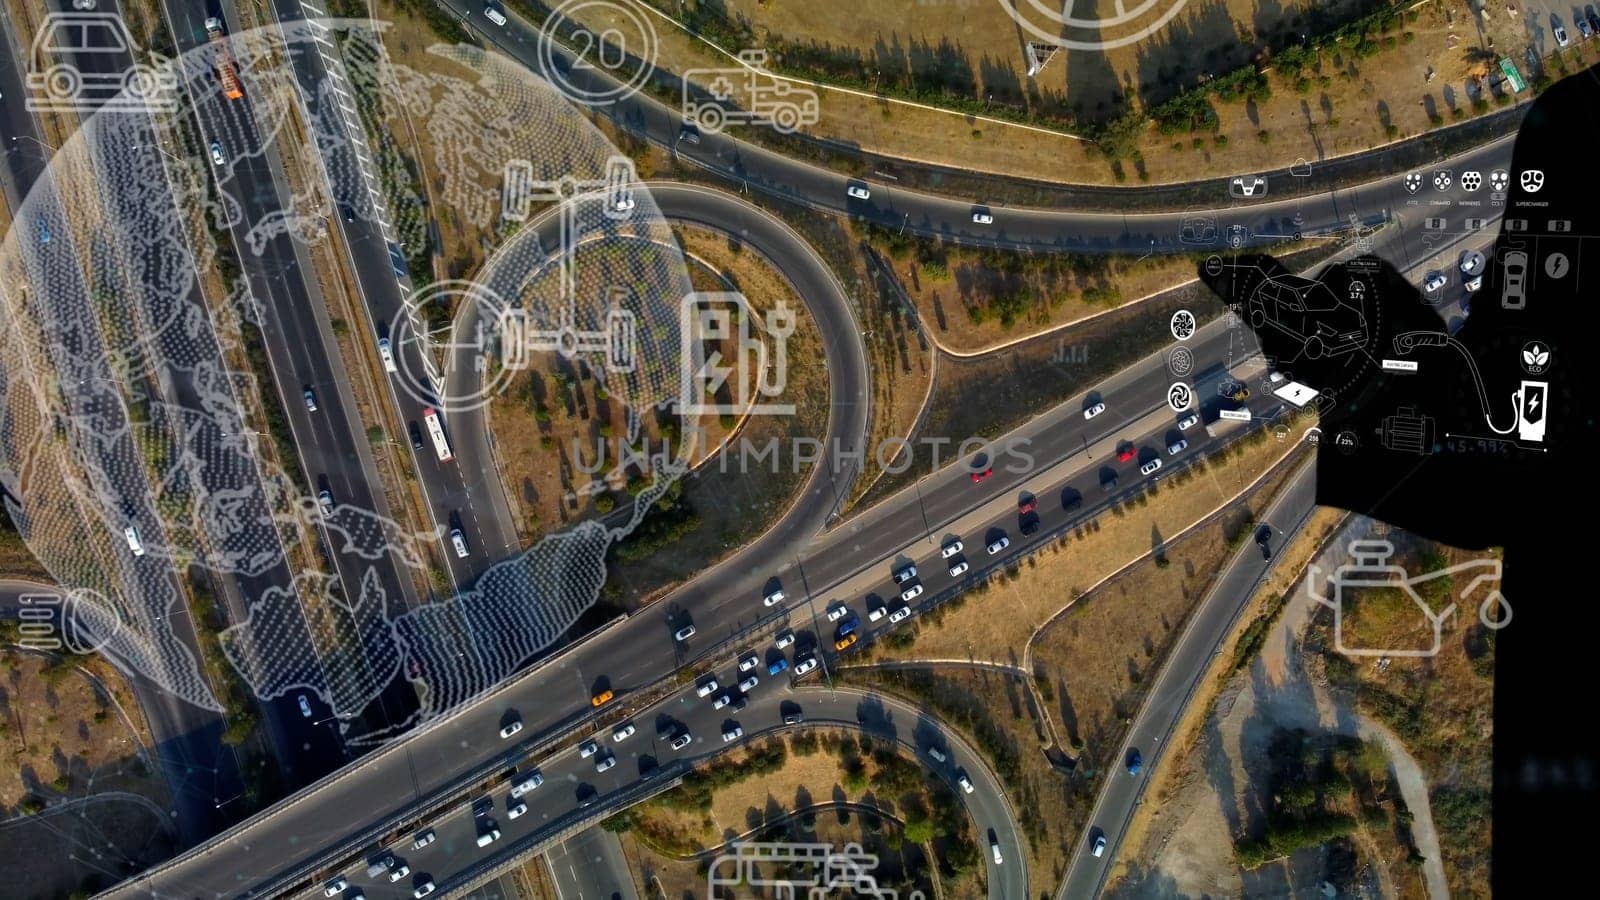 Intelligent Vehicles Cars Communicating Ai Logistic Autonomous Delivery Vehicles IoT GPS Tracking Satellite 5G Smart Roads Traffic Road Junction Interchange Motorway Triangulation Of Traffic Data. High quality photo